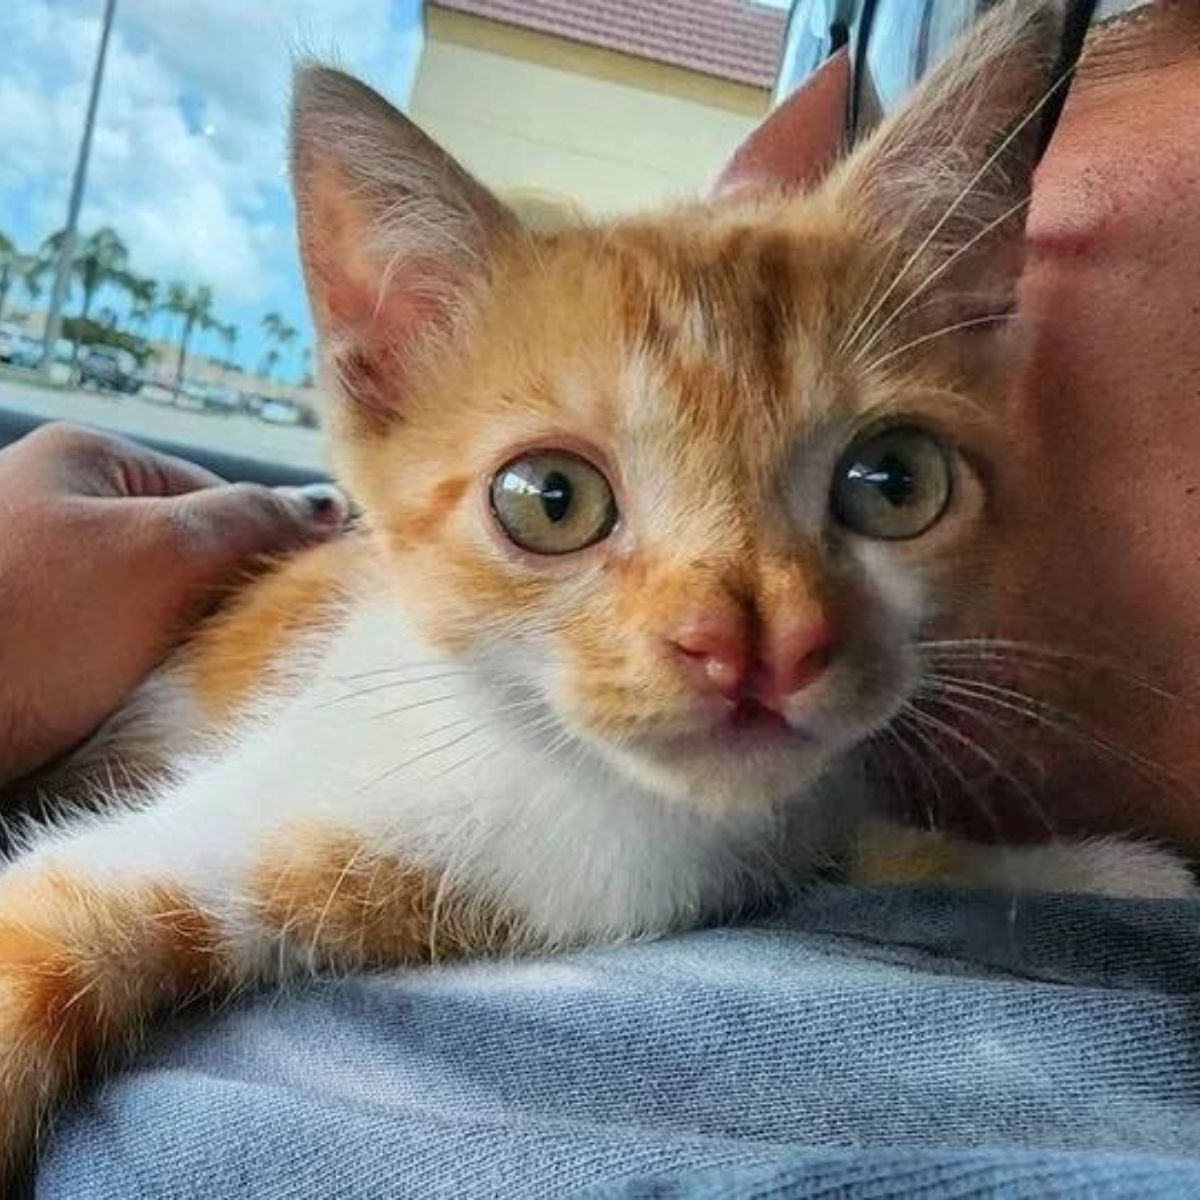 Kitten with a distinct nose